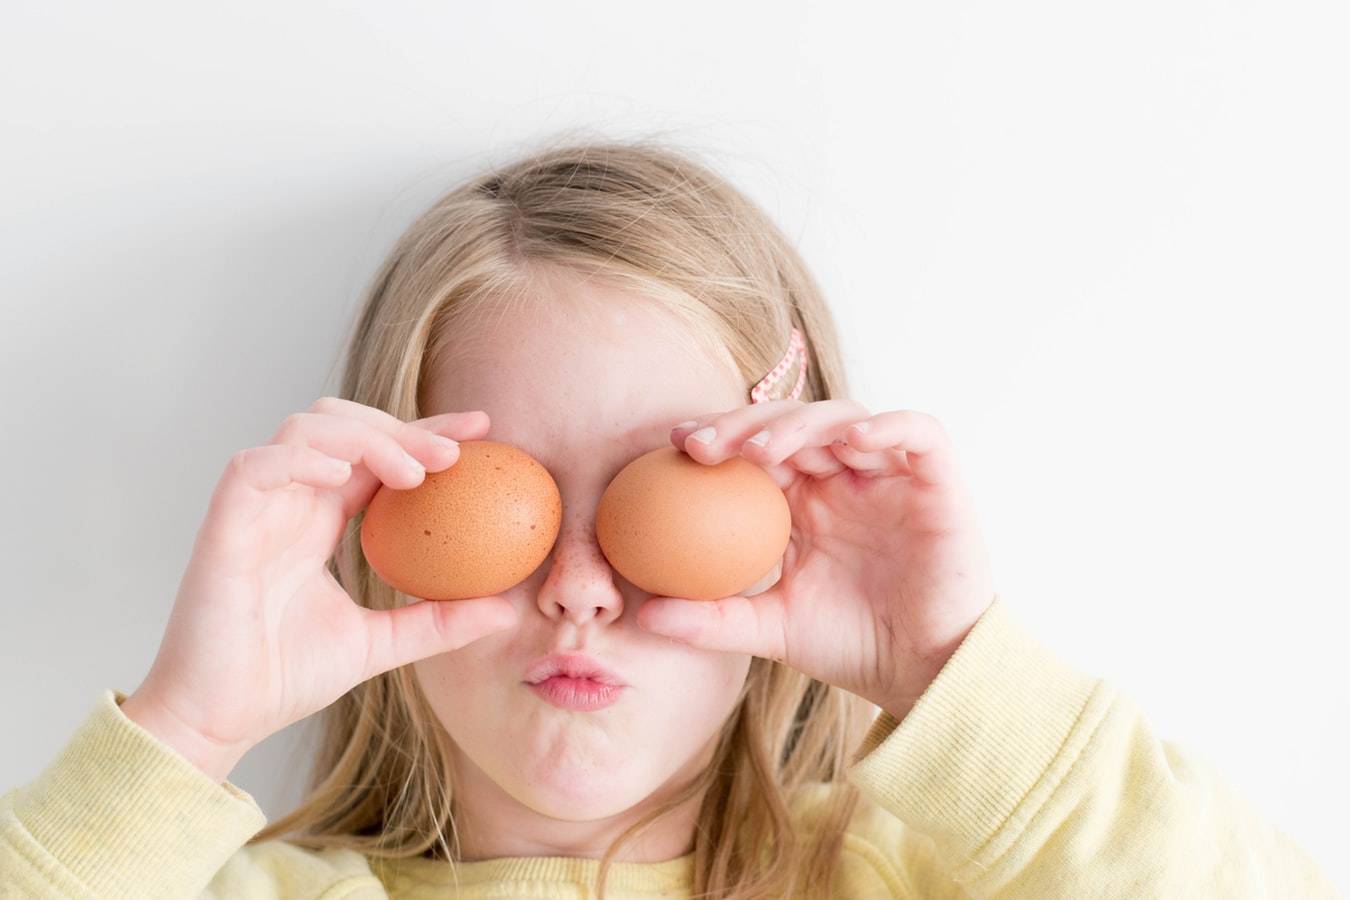 Child With Eggs Covering Their Eyes